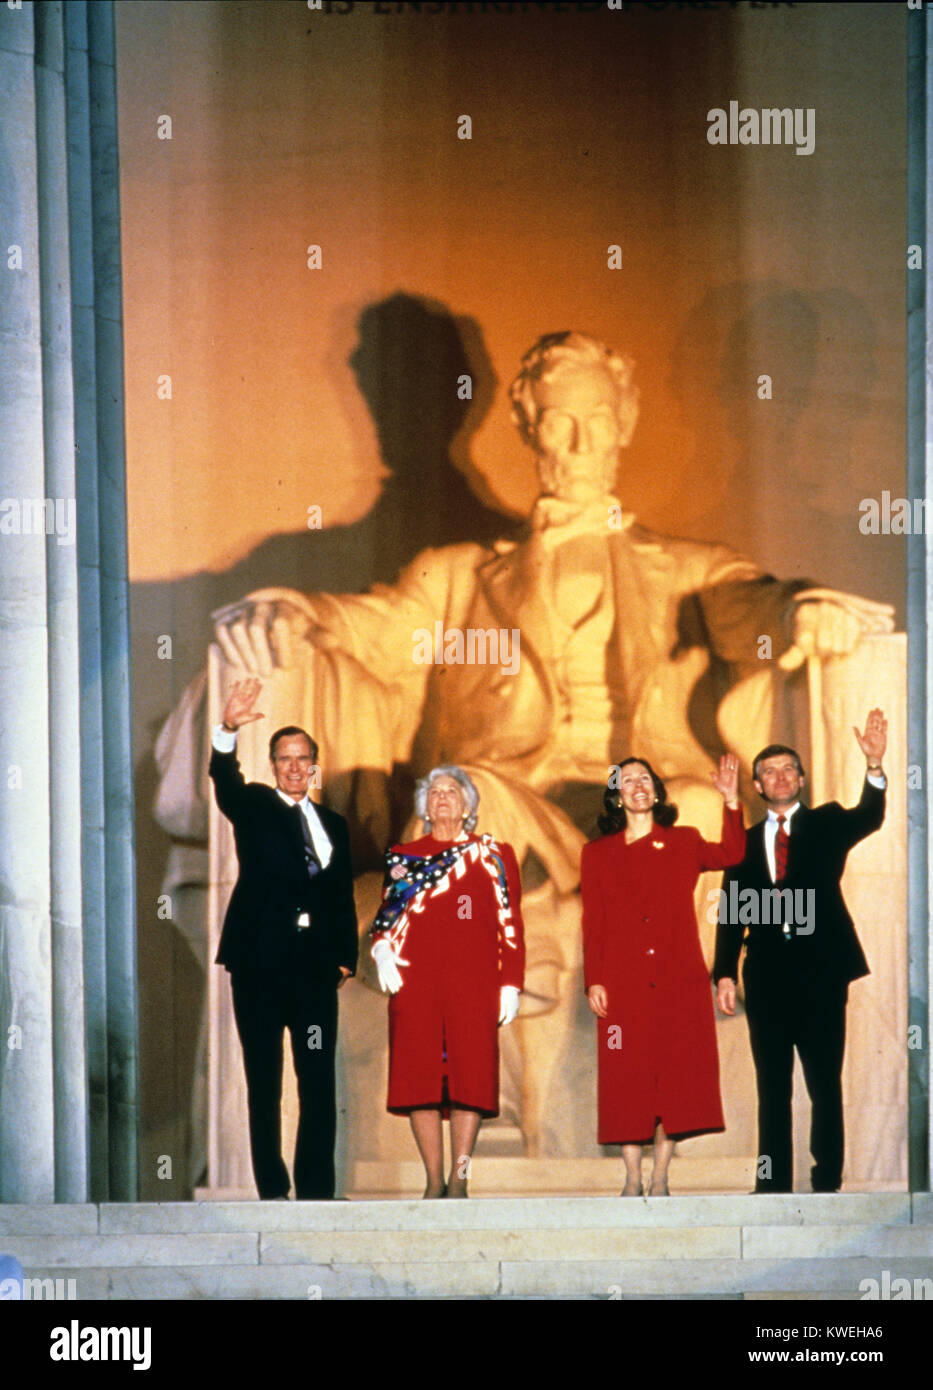 United States President-elect George H.W. Bush attends the opening ceremony for his inauguration at the Lincoln Memorial in Washington, DC on January 18 1989.  From left to right: President-elect Bush, Barbara Bush, Marilyn Quayle, and US Vice President-elect Dan Quayle. Credit: Robert Trippett / Pool via CNP /MediaPunch Stock Photo